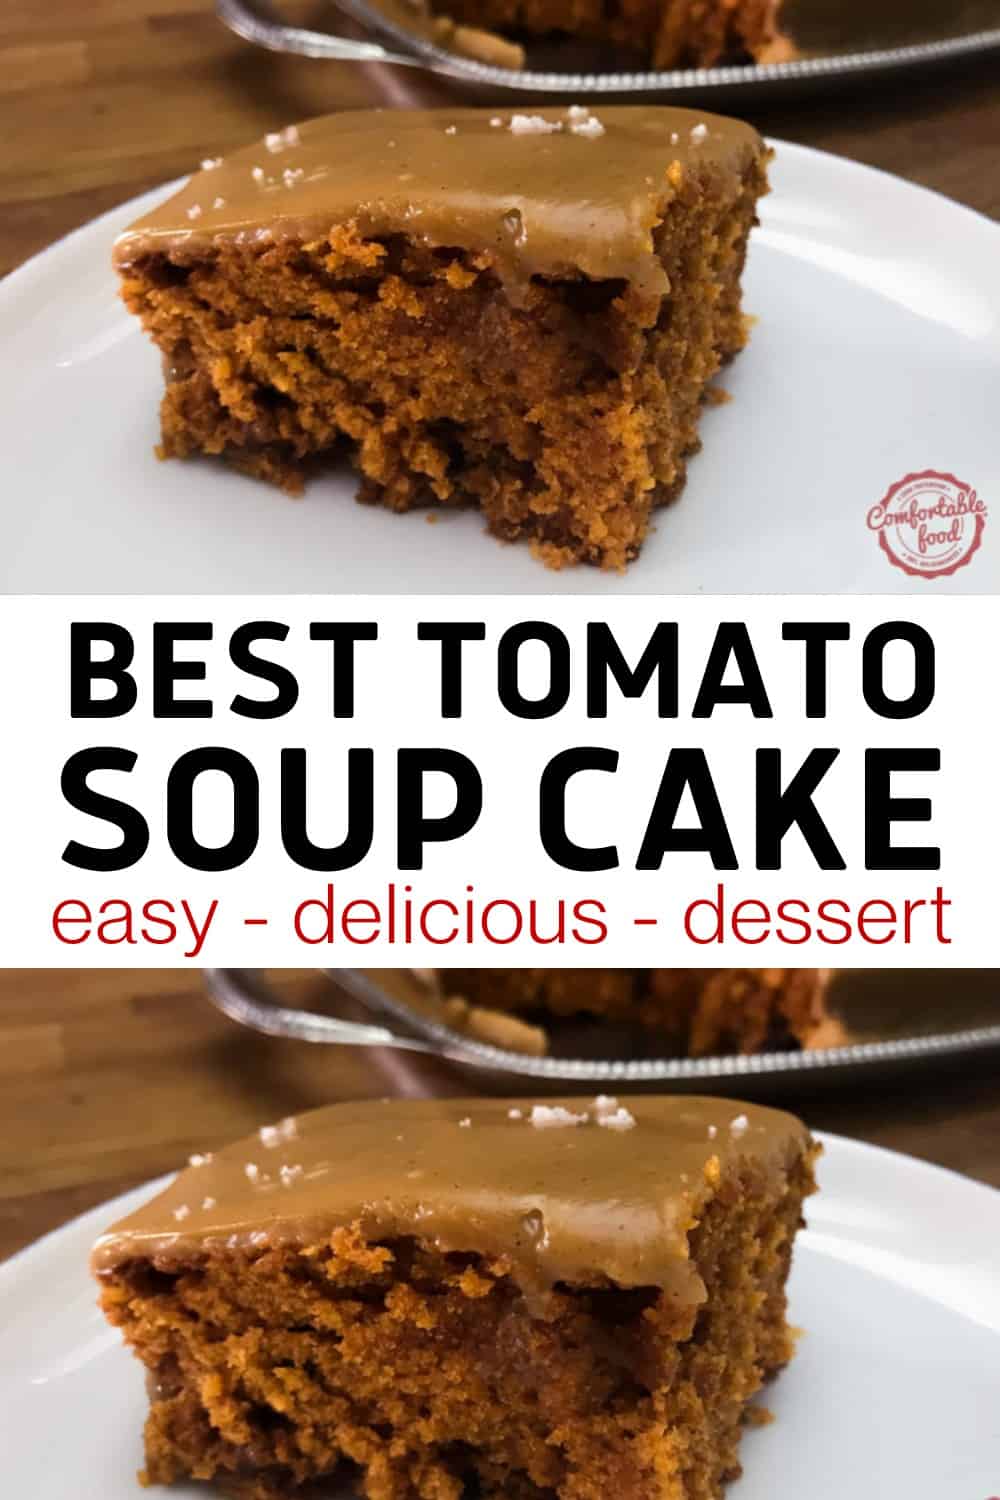 Tomato soup cake with salted caramel icing